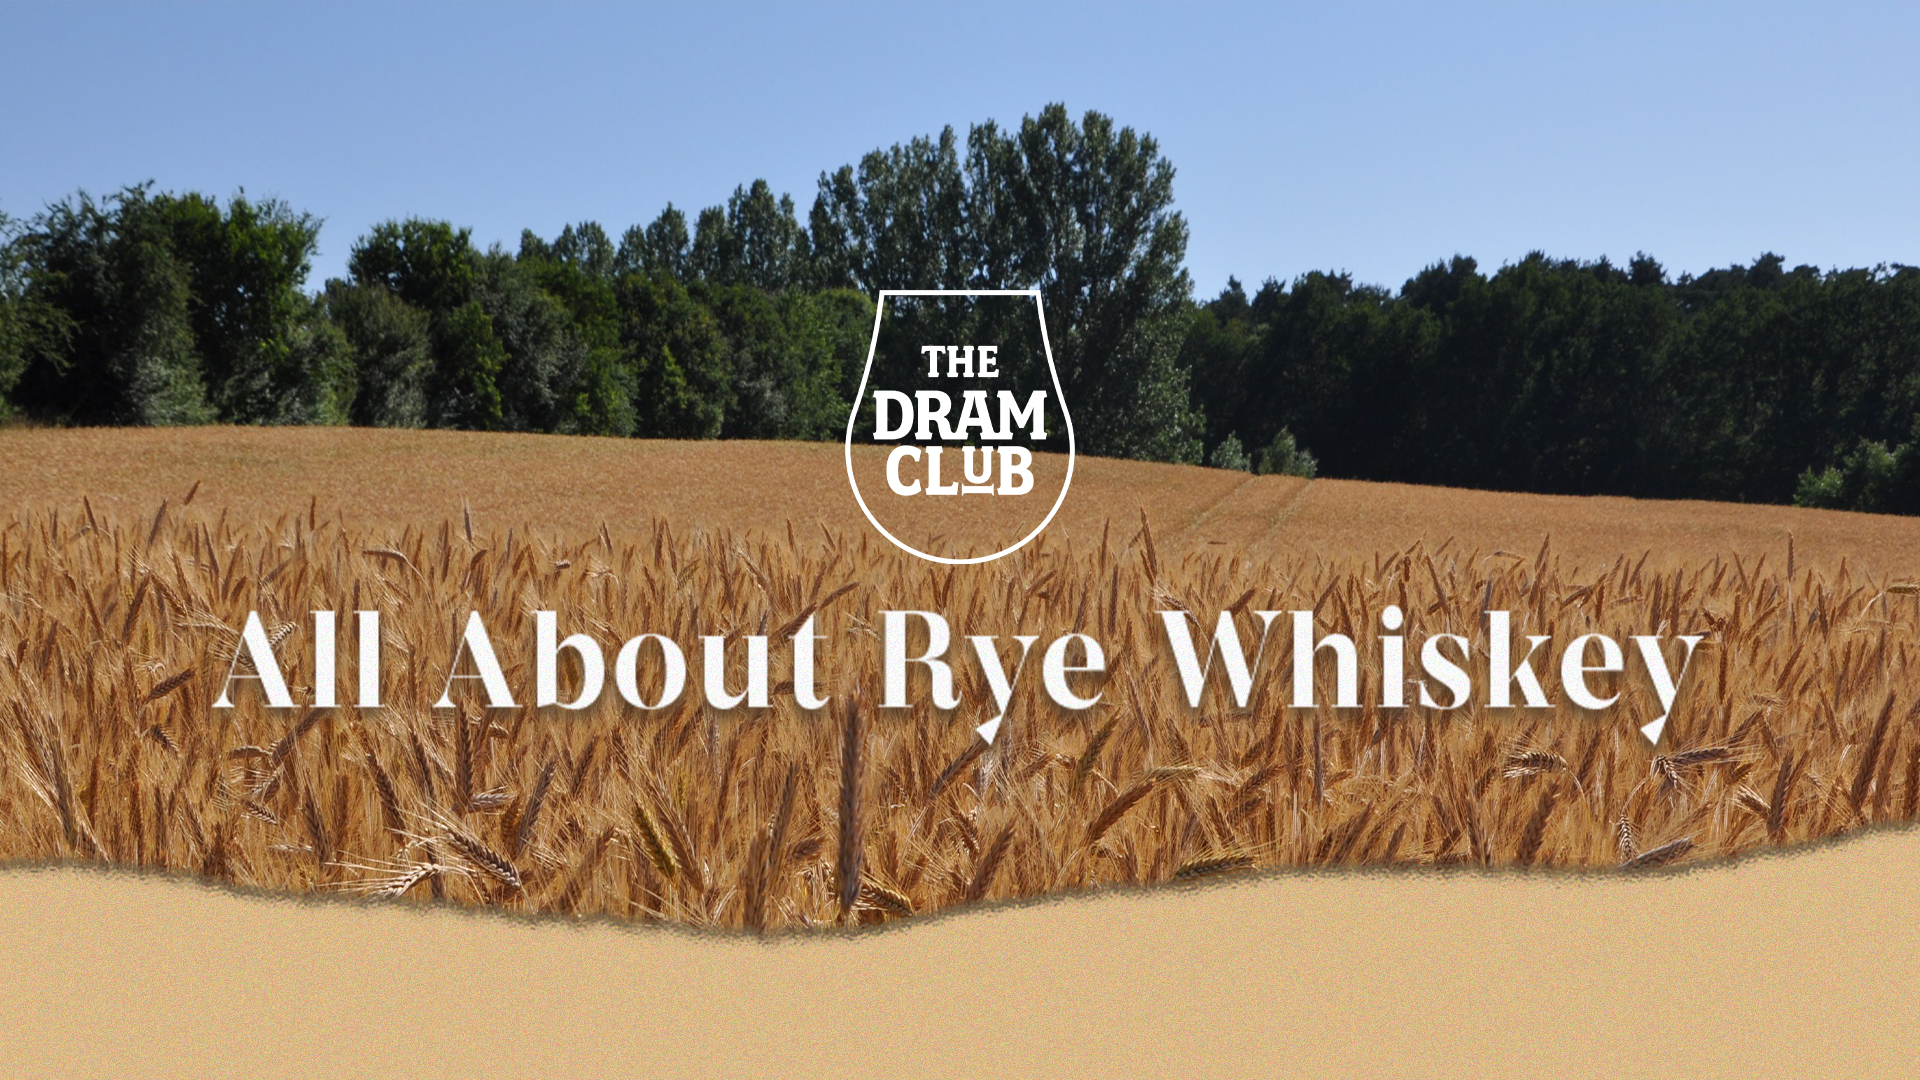 All About Rye whiskey